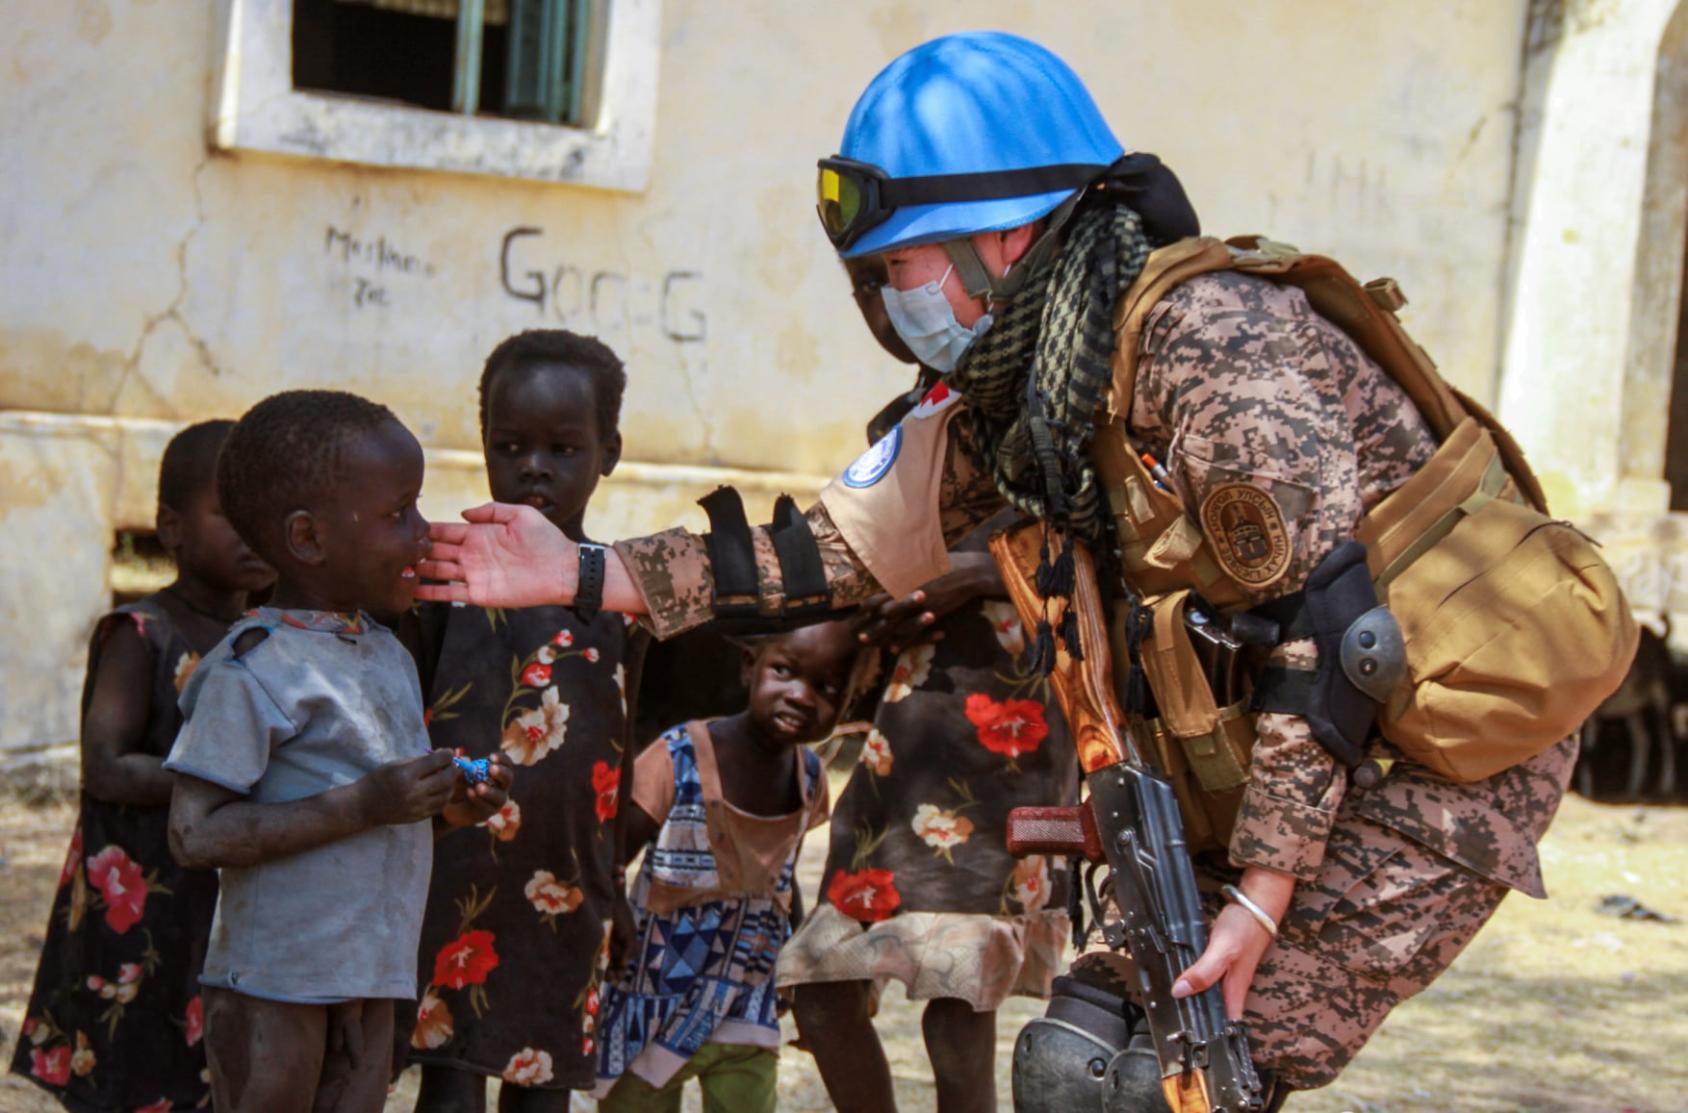 A woman peacekeeper in blue helmet touching the face of a smiling young black boy. 